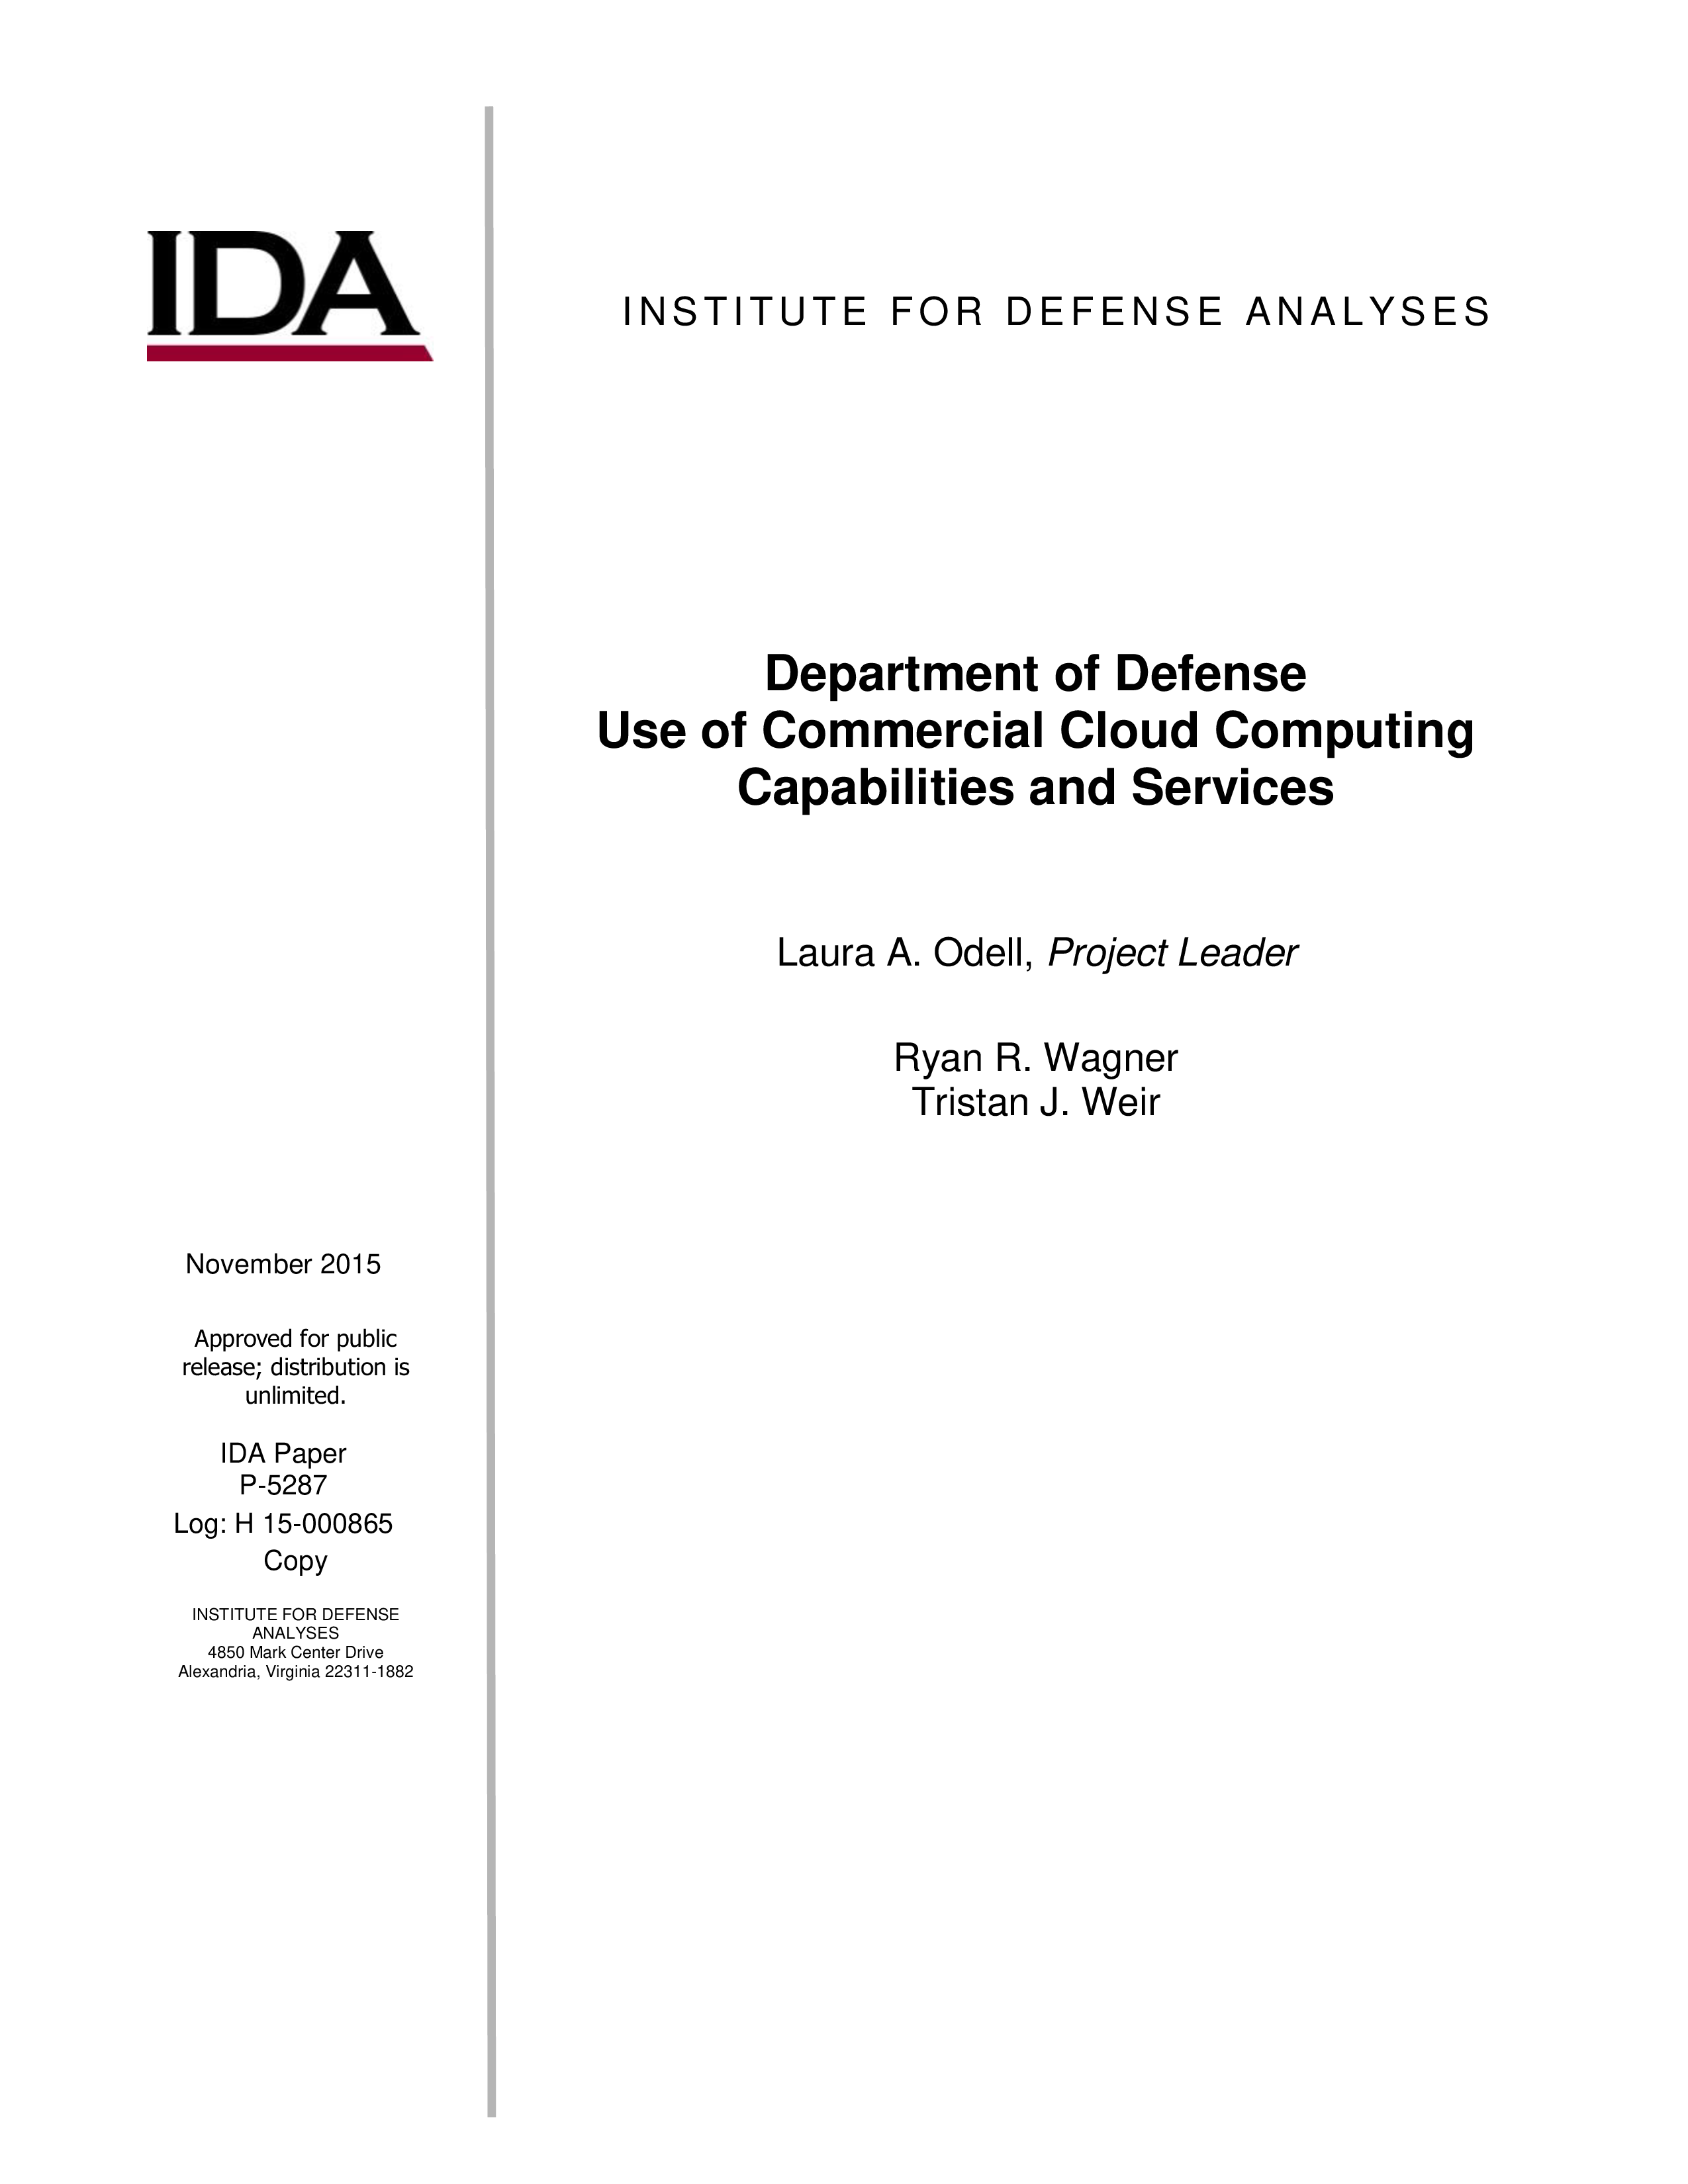 Department of Defense Use of Commercial Cloud Computing Capabilities and Services